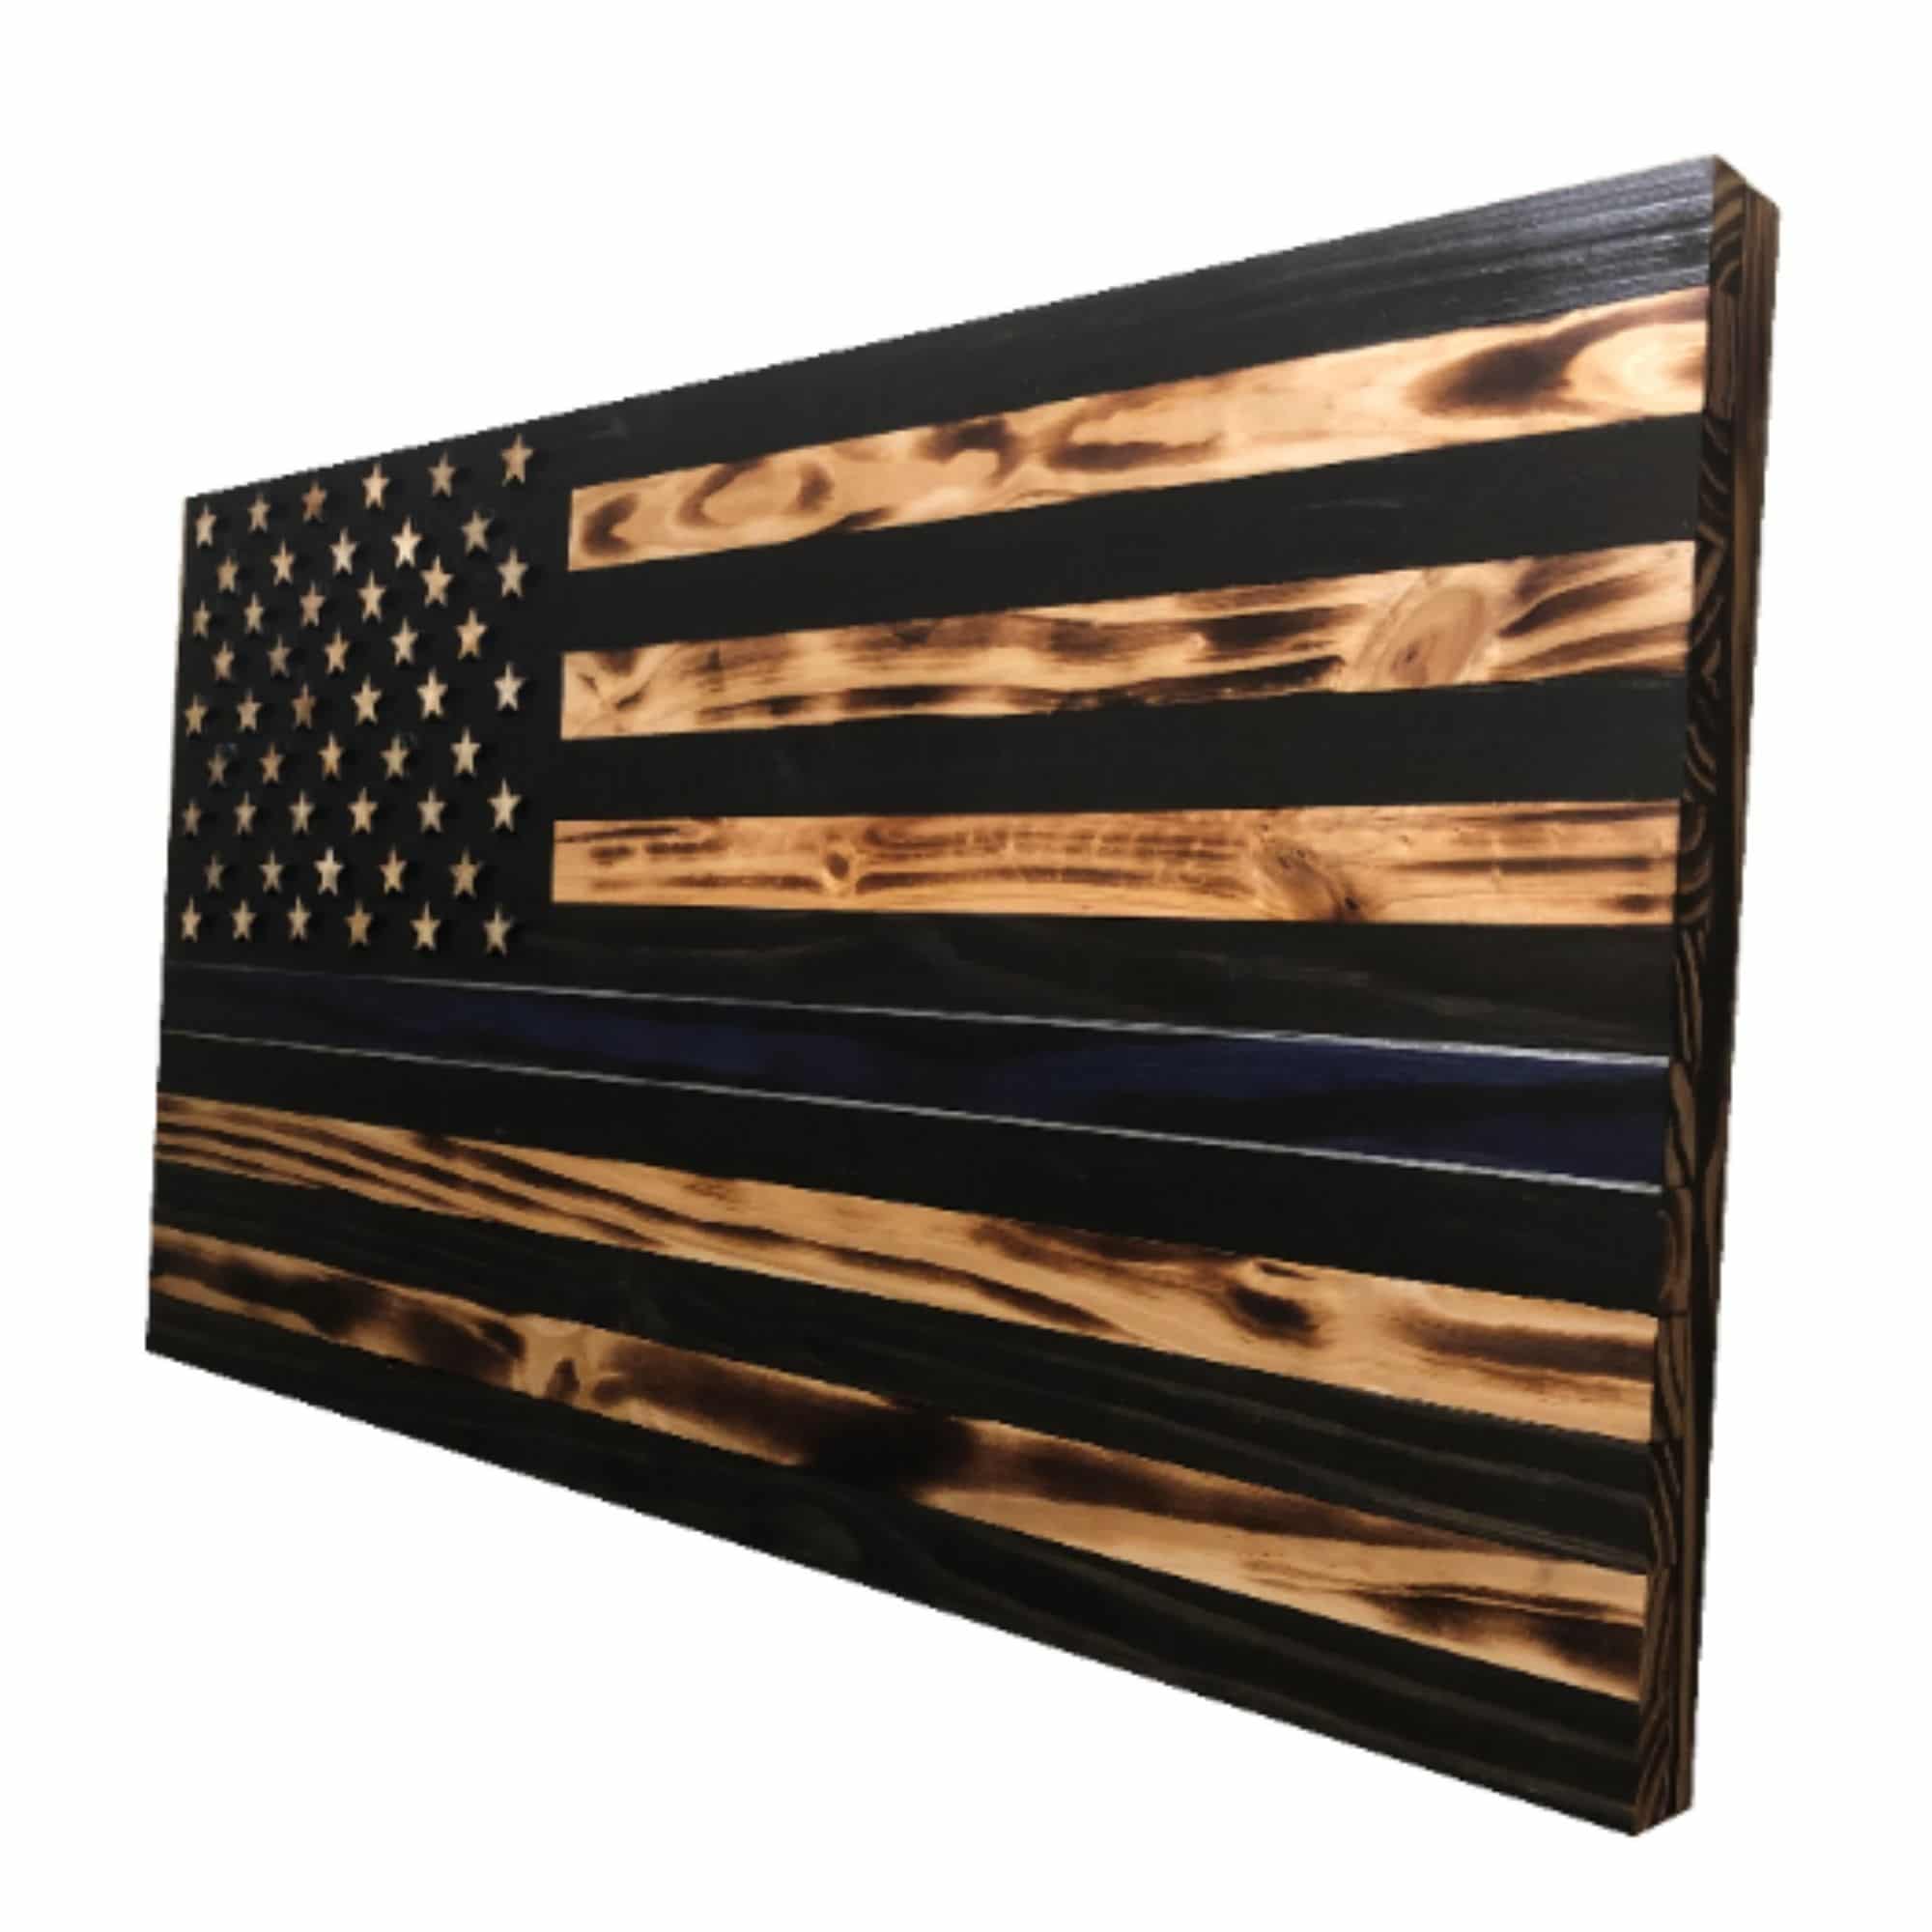 36" x 19" Large Hand-Crafted Thin Blue Line Wood American Flag for our Police 